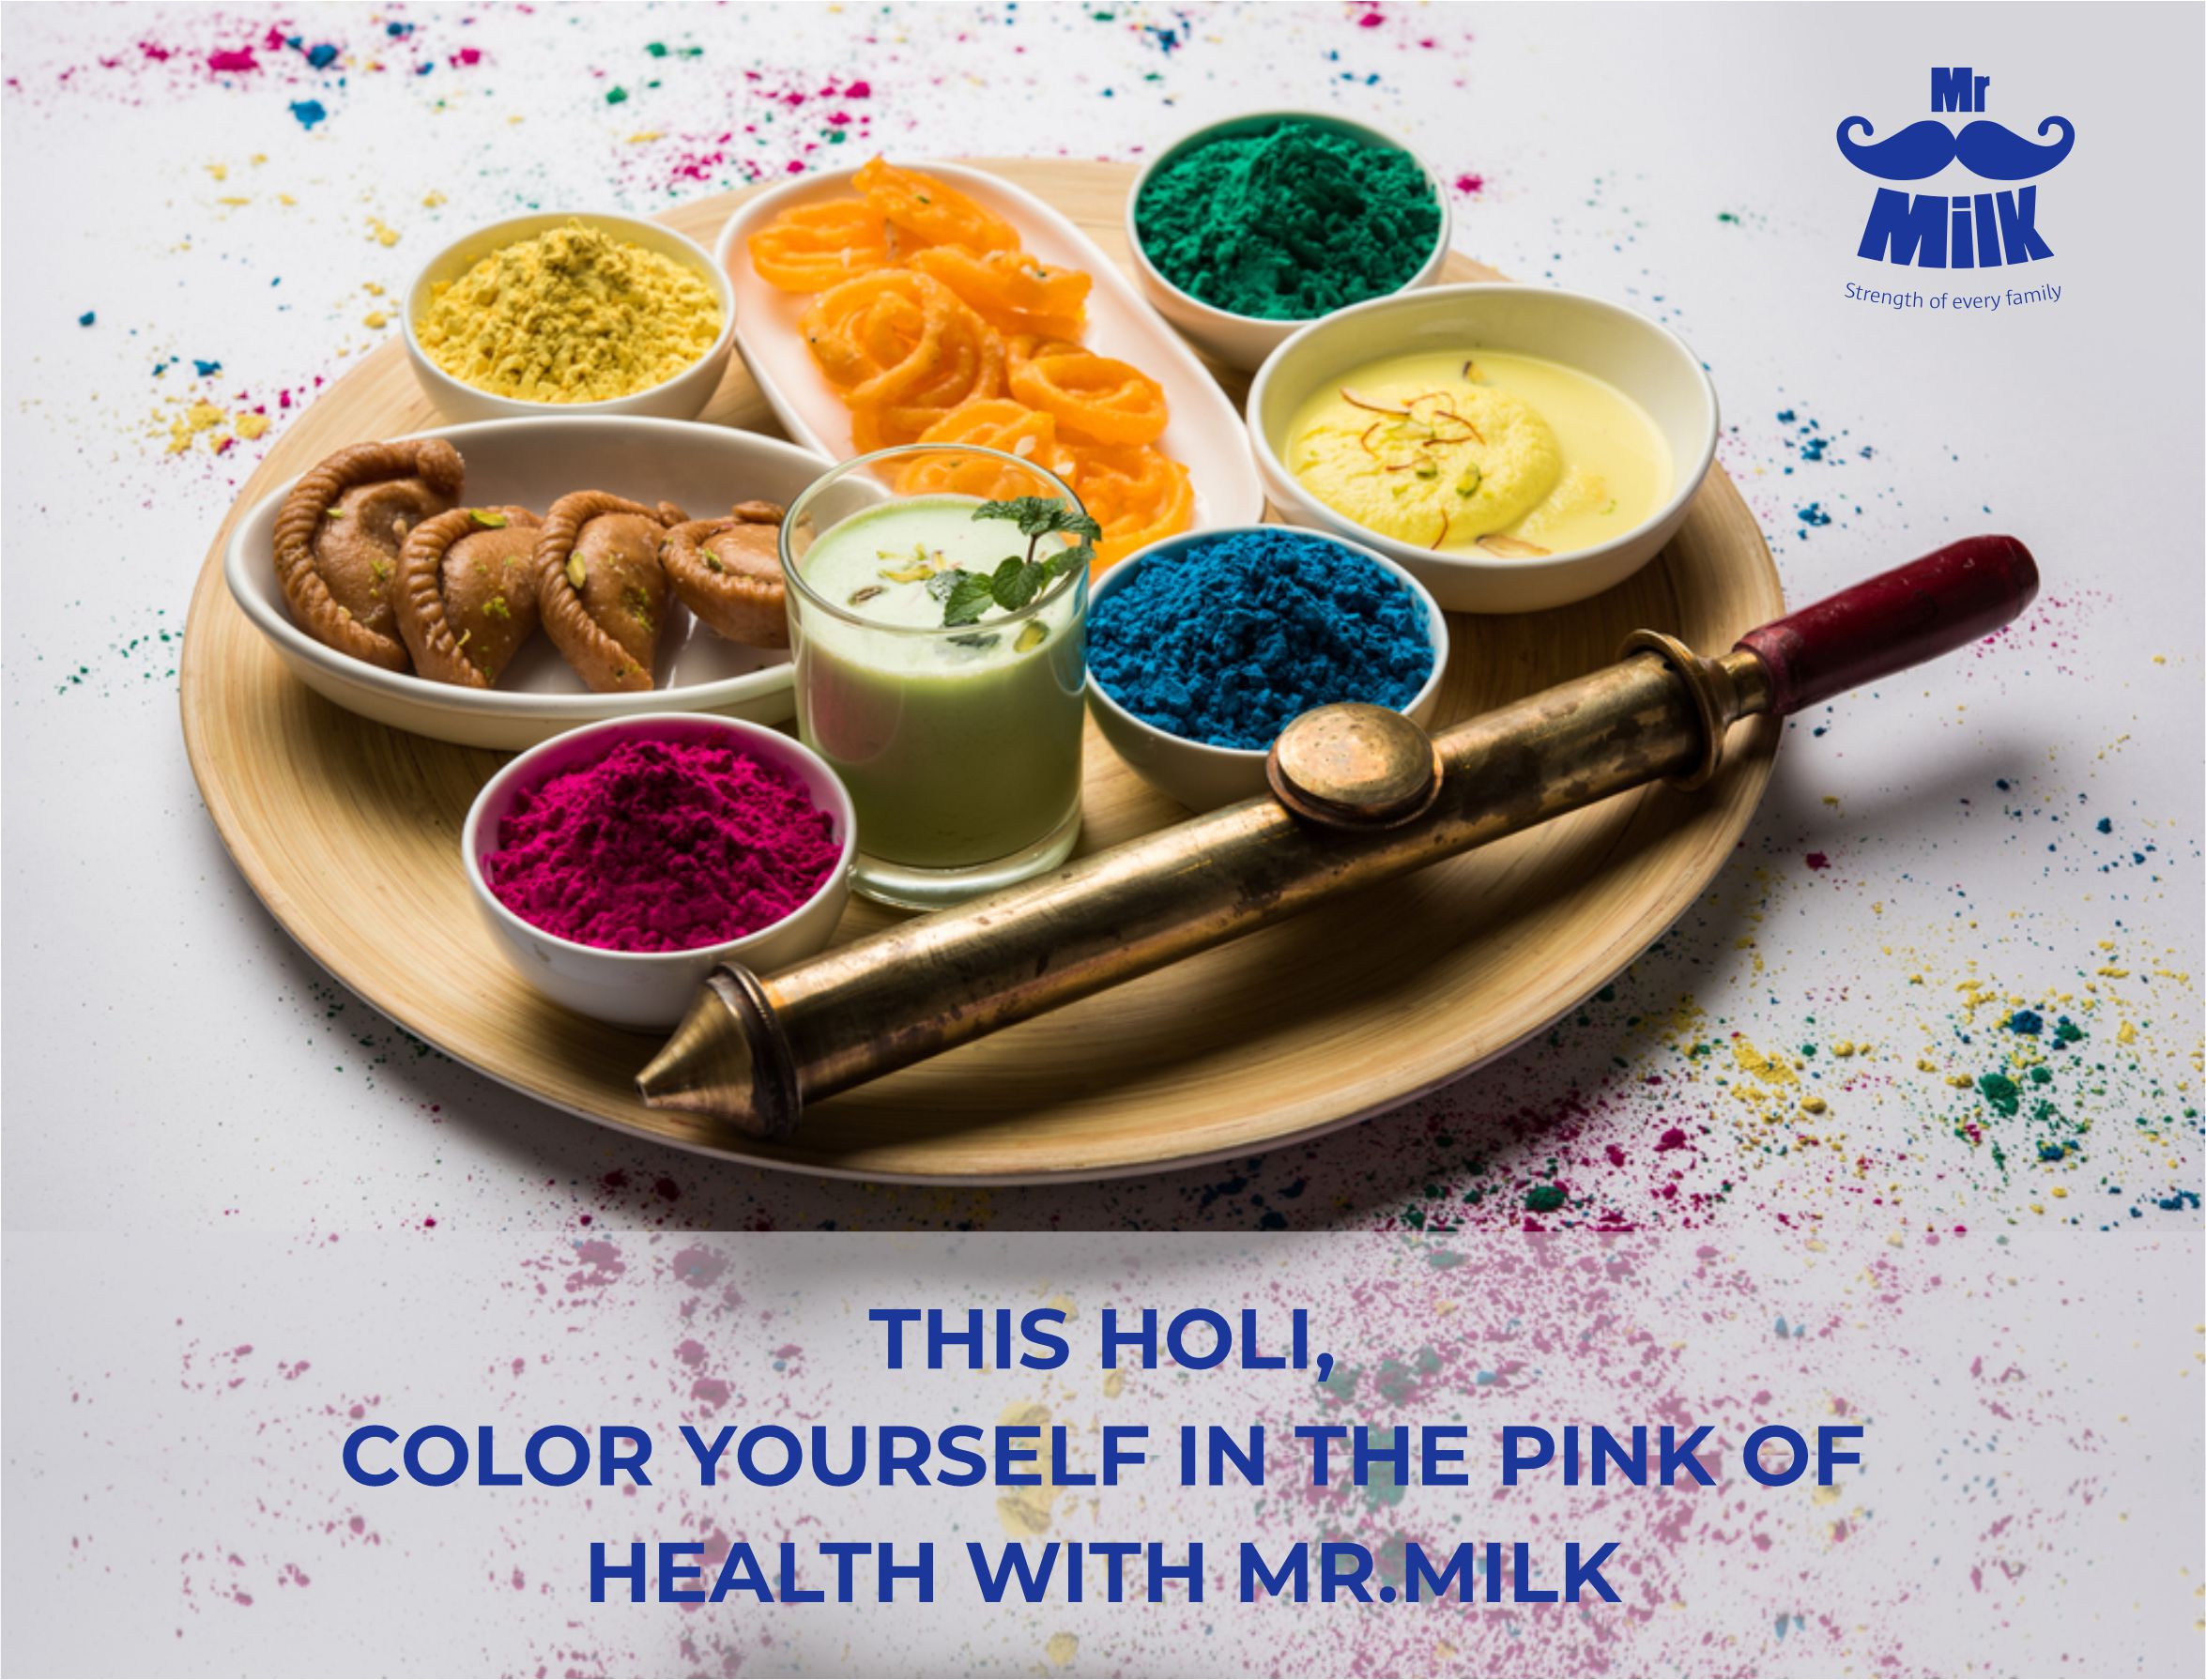 This Holi, color yourself in the pink of health with Mr.Milk